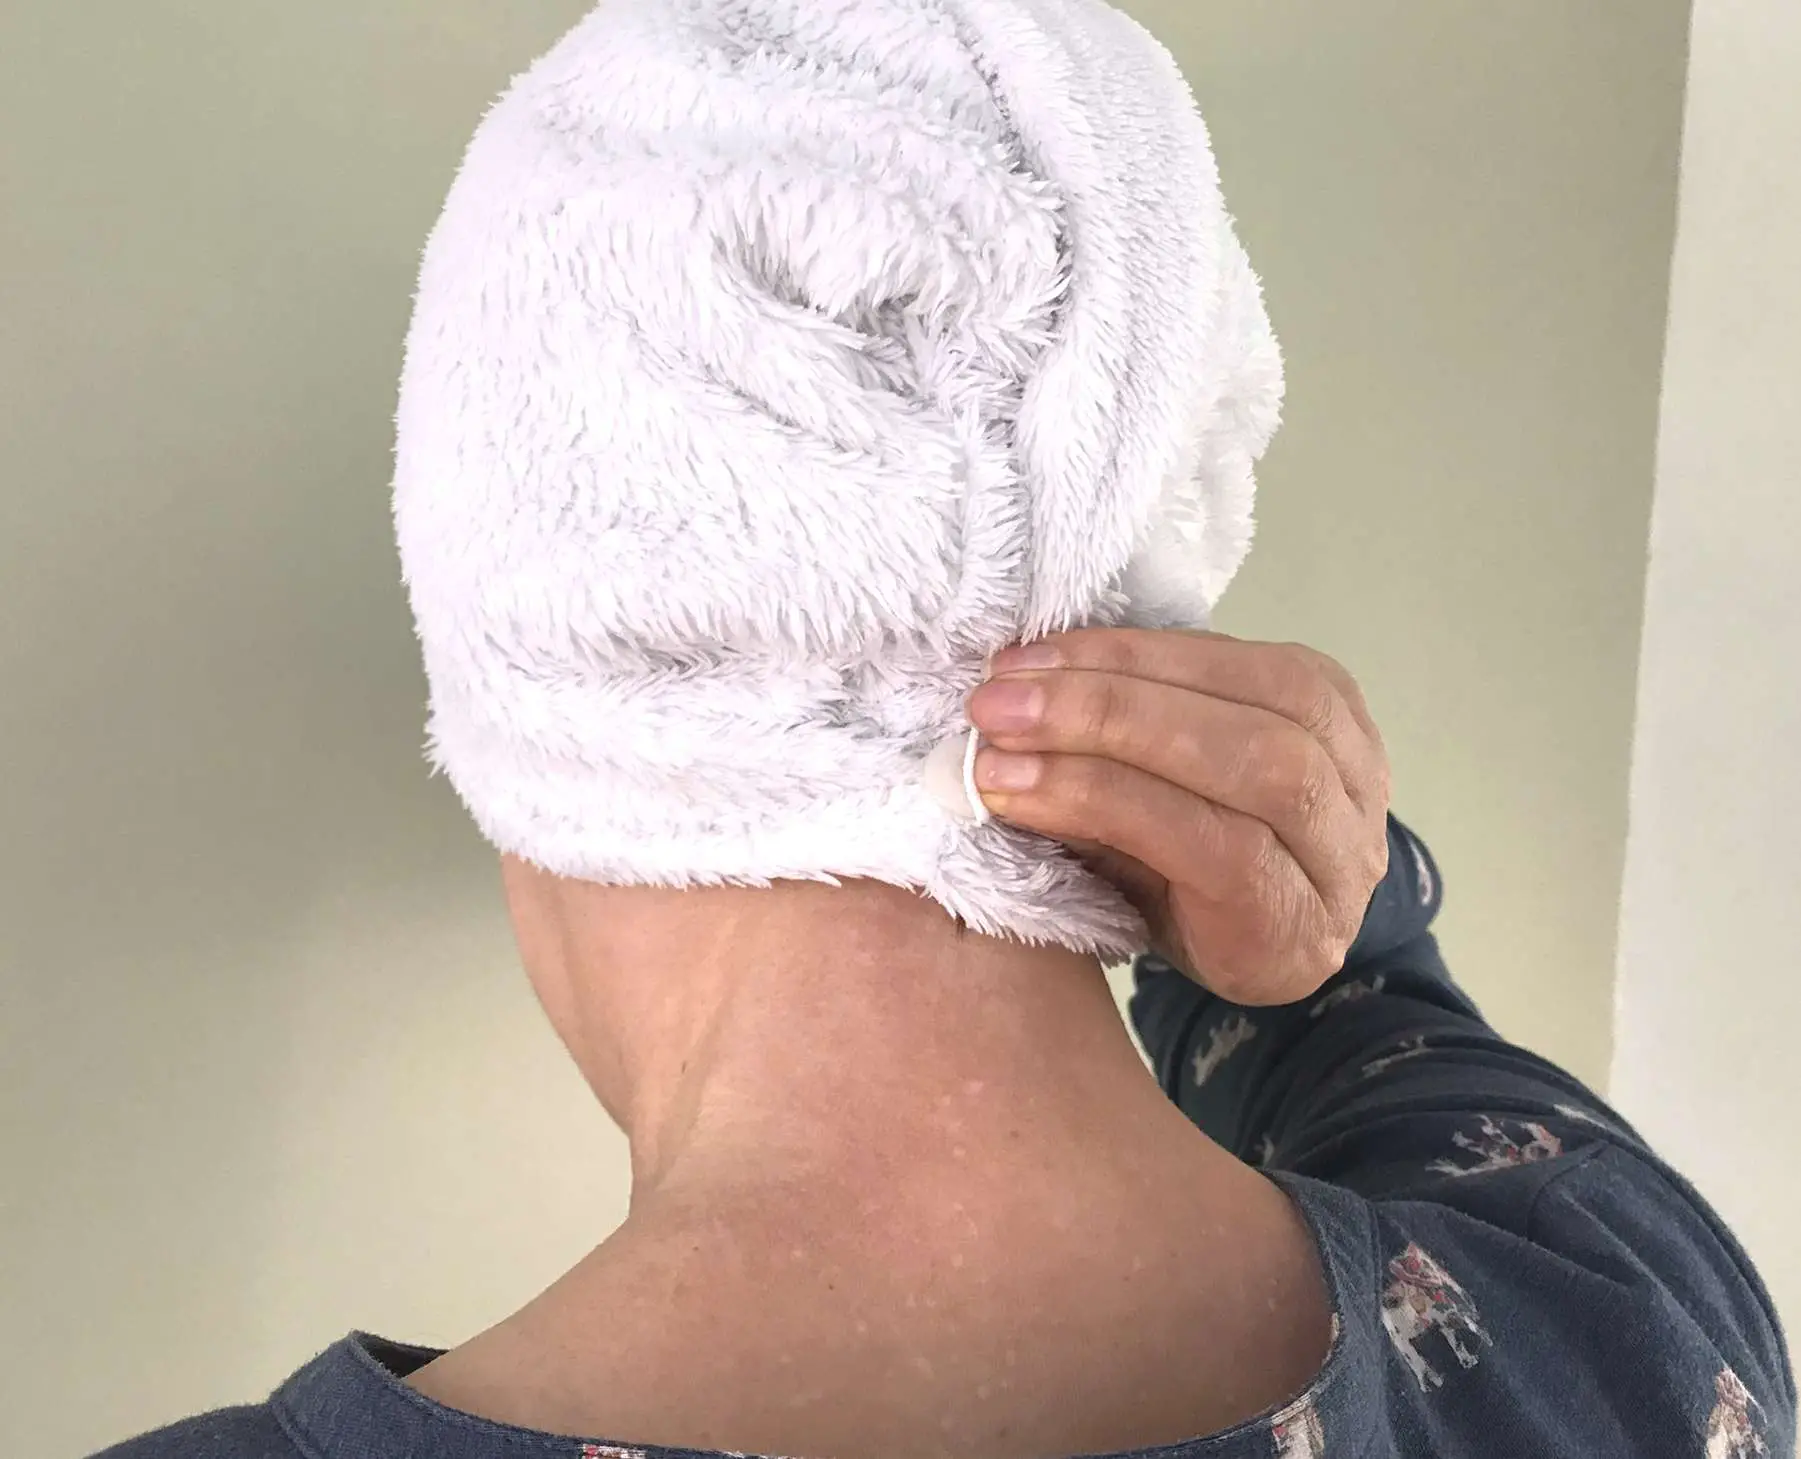 DIY Hair Towel Wrap: Step-by-Step Guide and Free Pattern